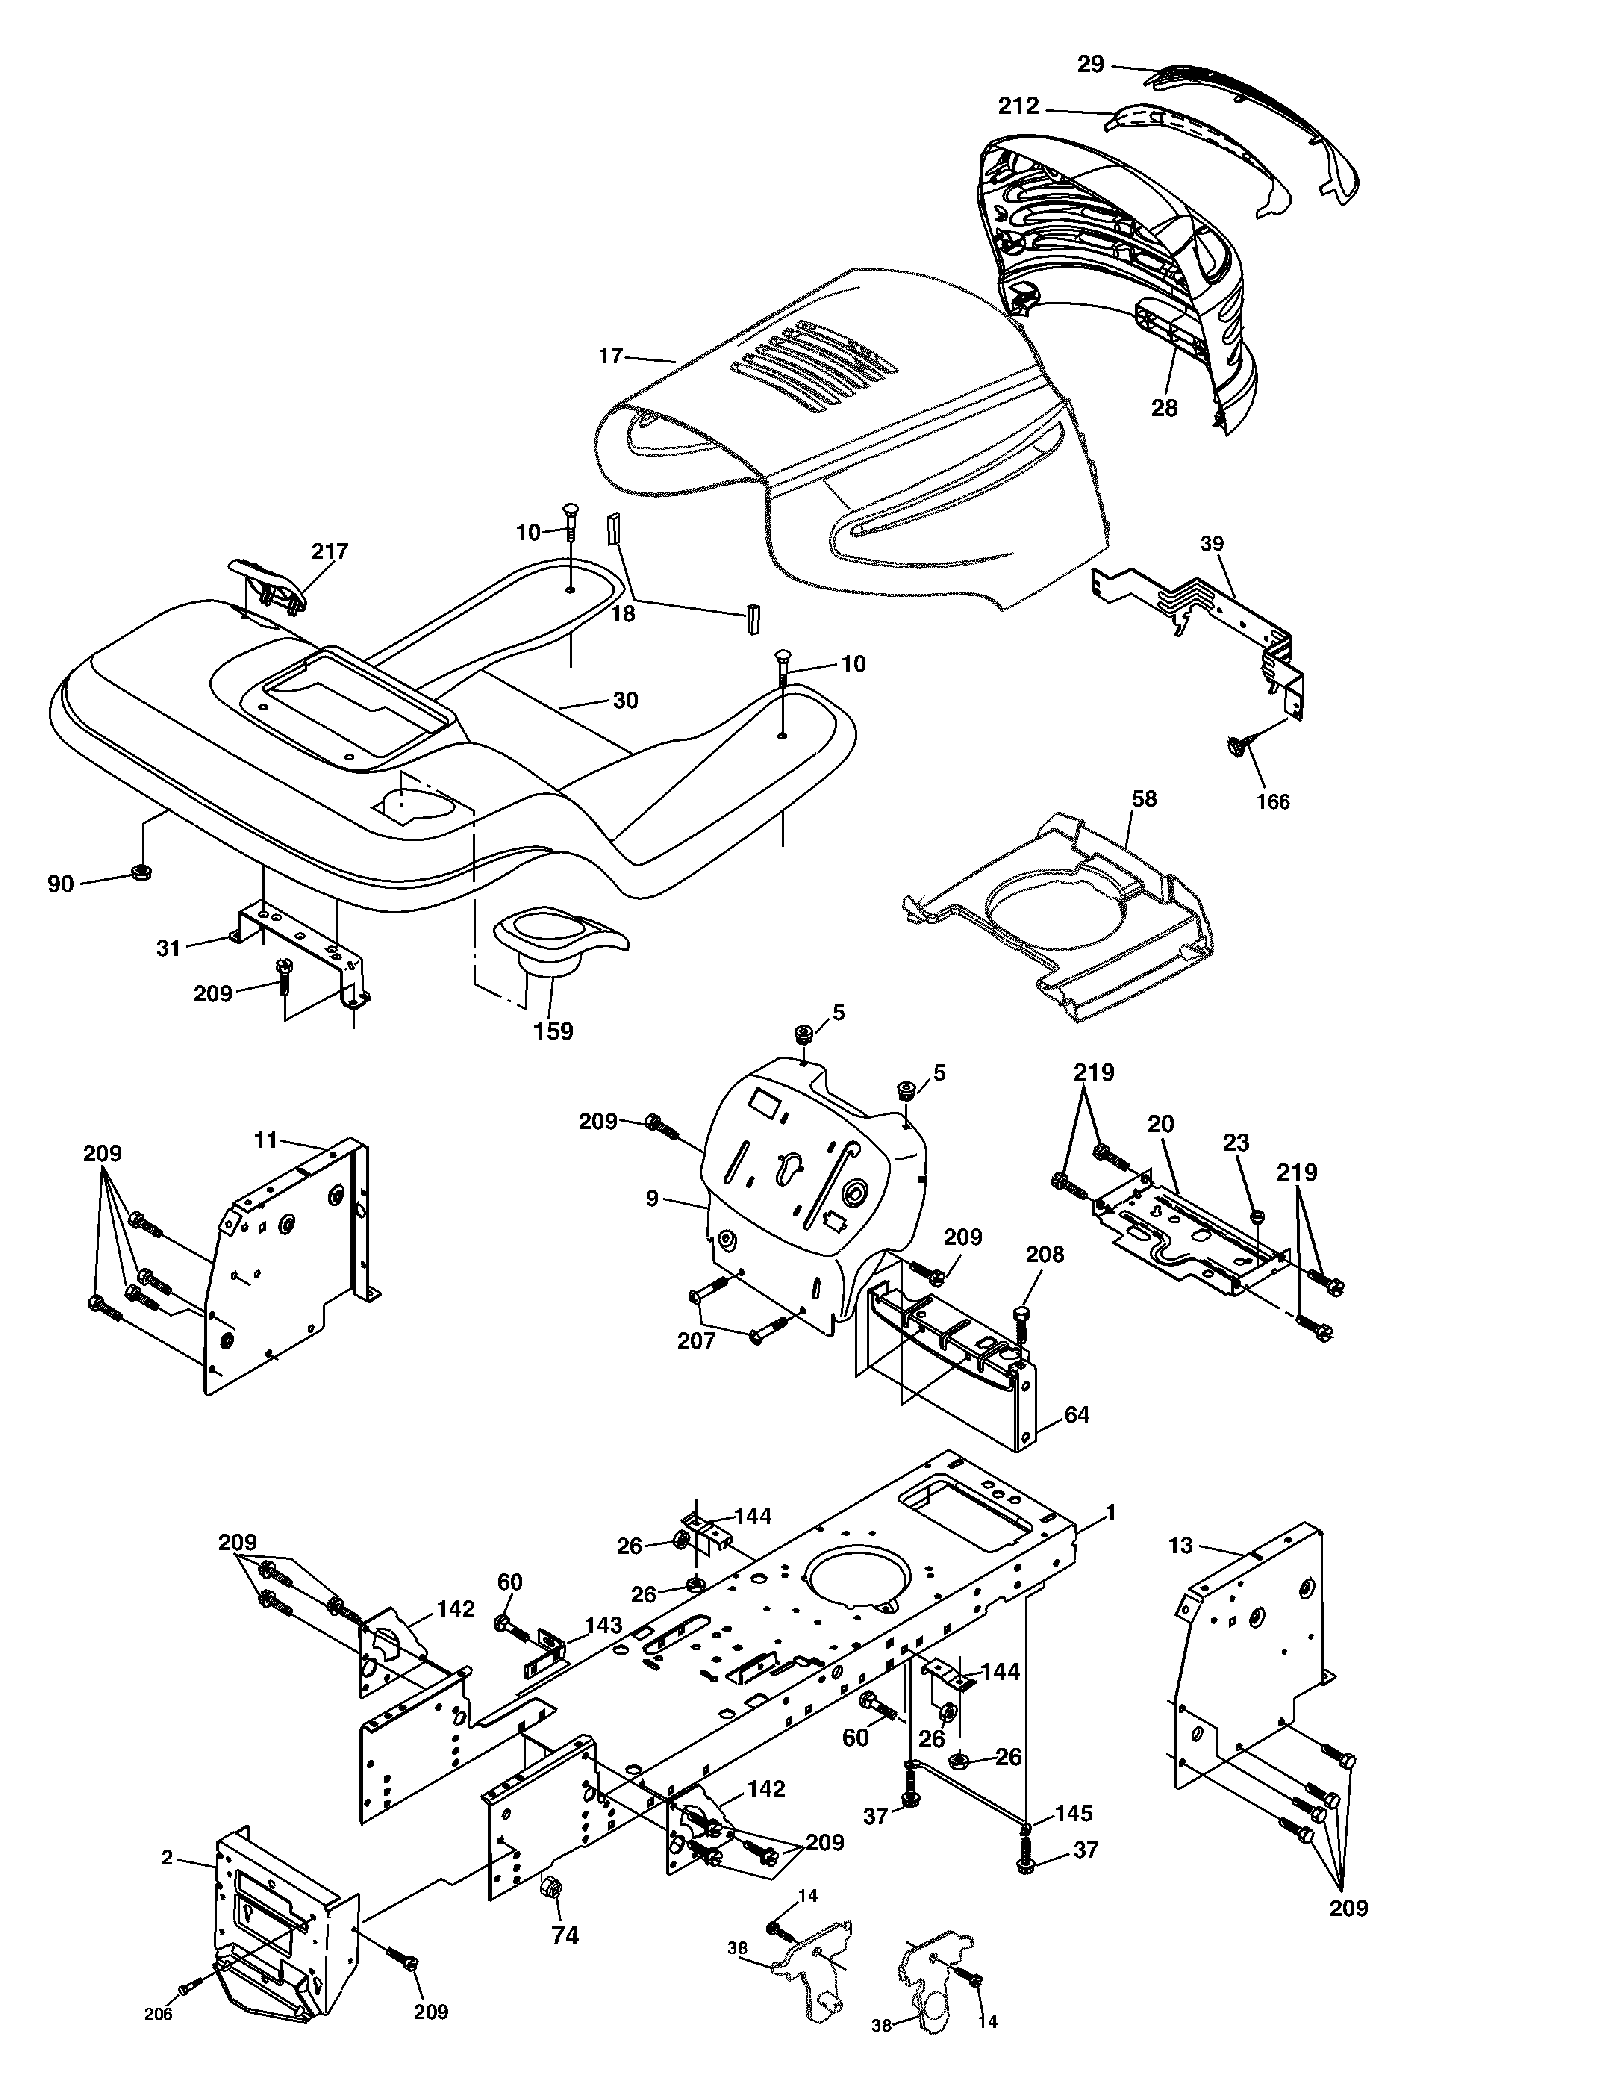 Chassis and appendix 579841401, 532176554, 532155272, 168337012, 872140608, 532174996, 532175255, 596564001, 183394X505, 532164655, 532180679, 532124028, 532062336, 583128201, 183824X599, , 532139976, 596030701, 532175710, 532407807, 532184462, 872140606, 532154798, 596322601, 532124346, 532175702, 532186689, 532175582, 532409167, 179950X428, 532189747, 532170165, 817670508, 817000612, 532183823, 179132X428, 532428867